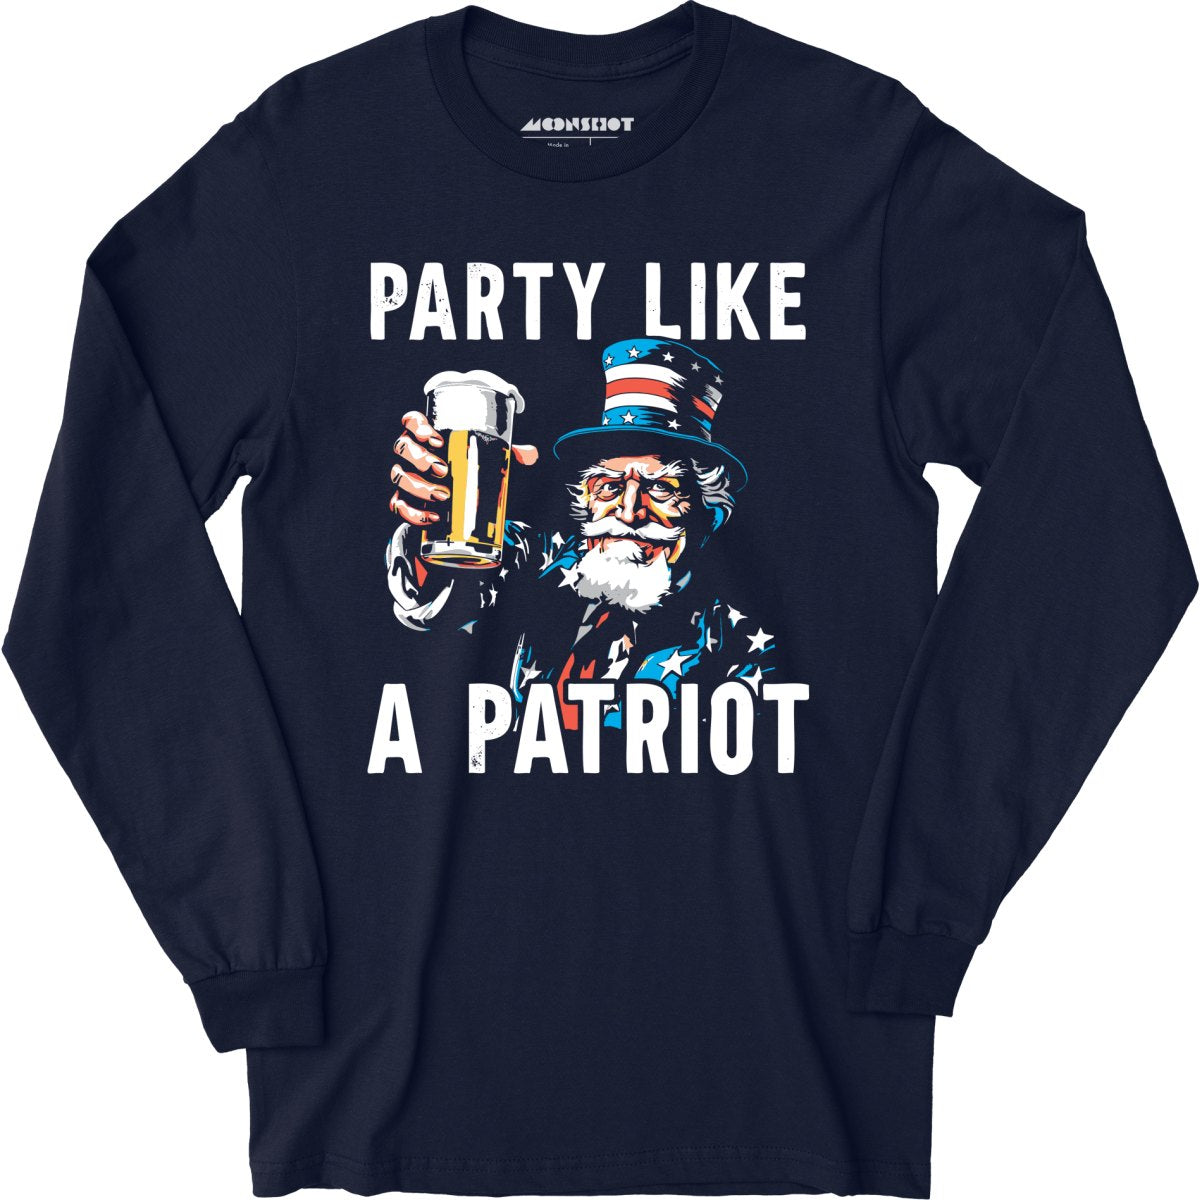 Party Like a Patriot - Long Sleeve T-Shirt